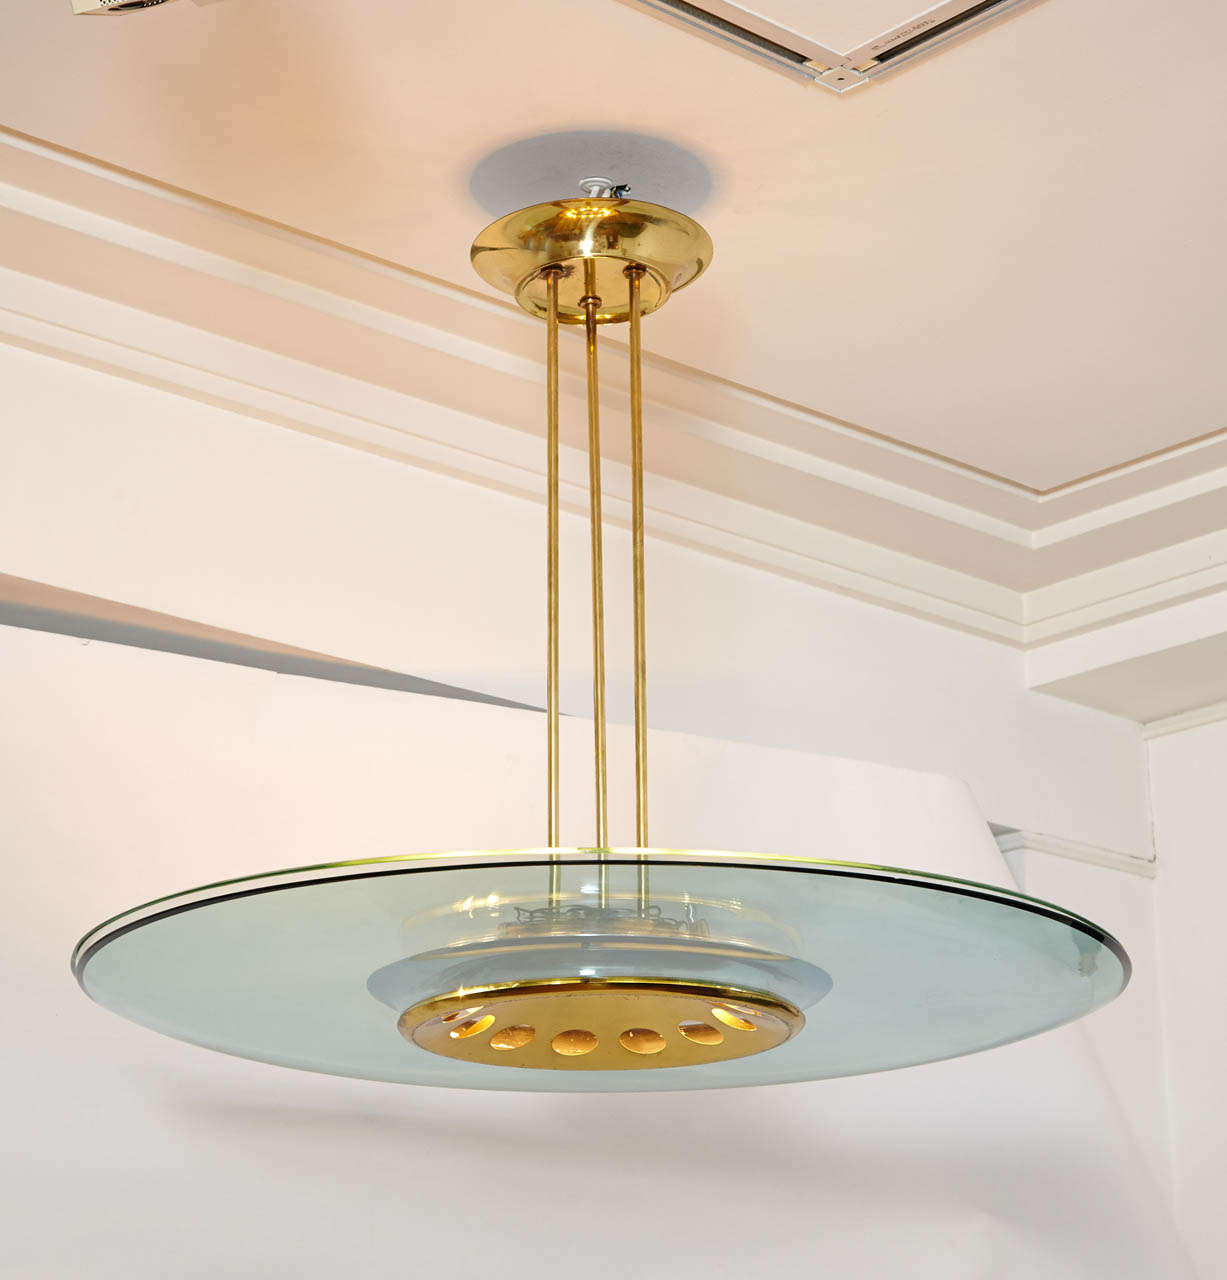 Beautiful glass and gilt brass chandelier by Max INGRAND for FONTANA ARTE, Italy, circa 1955.
With a wide double glass circle, 12 lights and three rods structure with upper pavilion.
Ref : Modèle similaire in P.E.Martin-Vivier, Max Ingrand, du